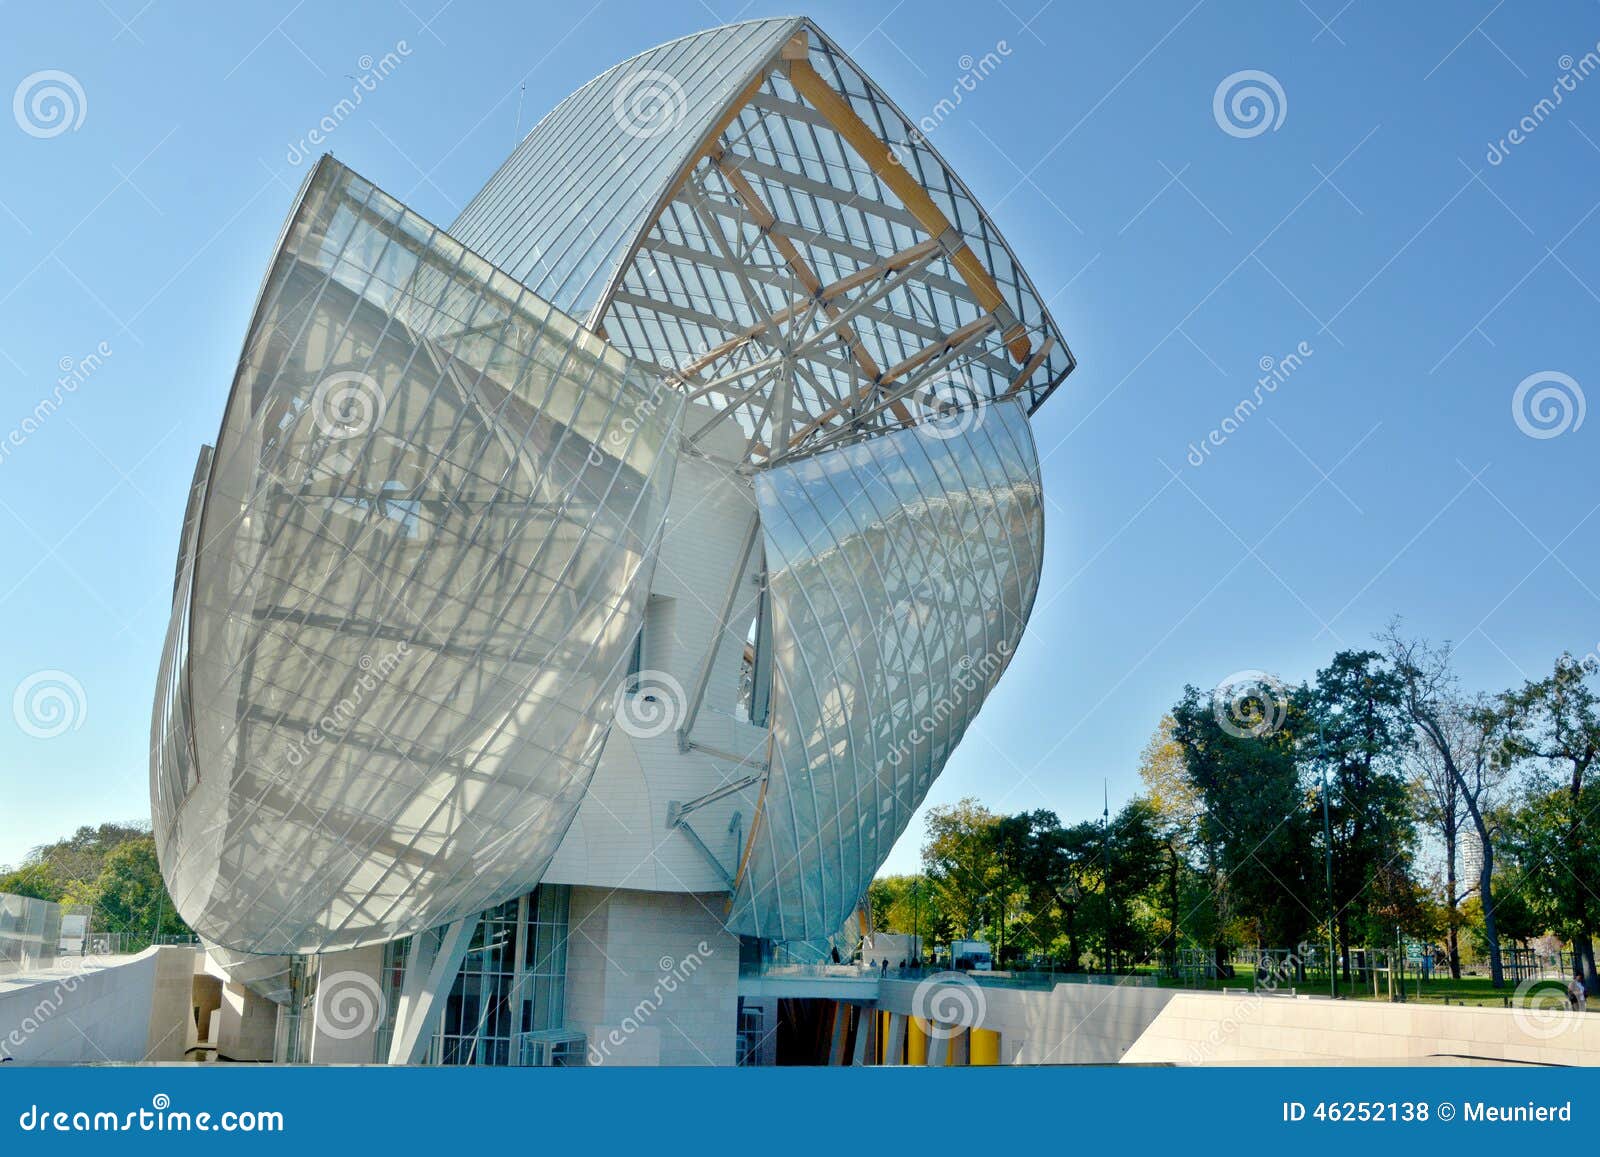 Louis Vuitton Foundation editorial stock photo. Image of famous - 46252138